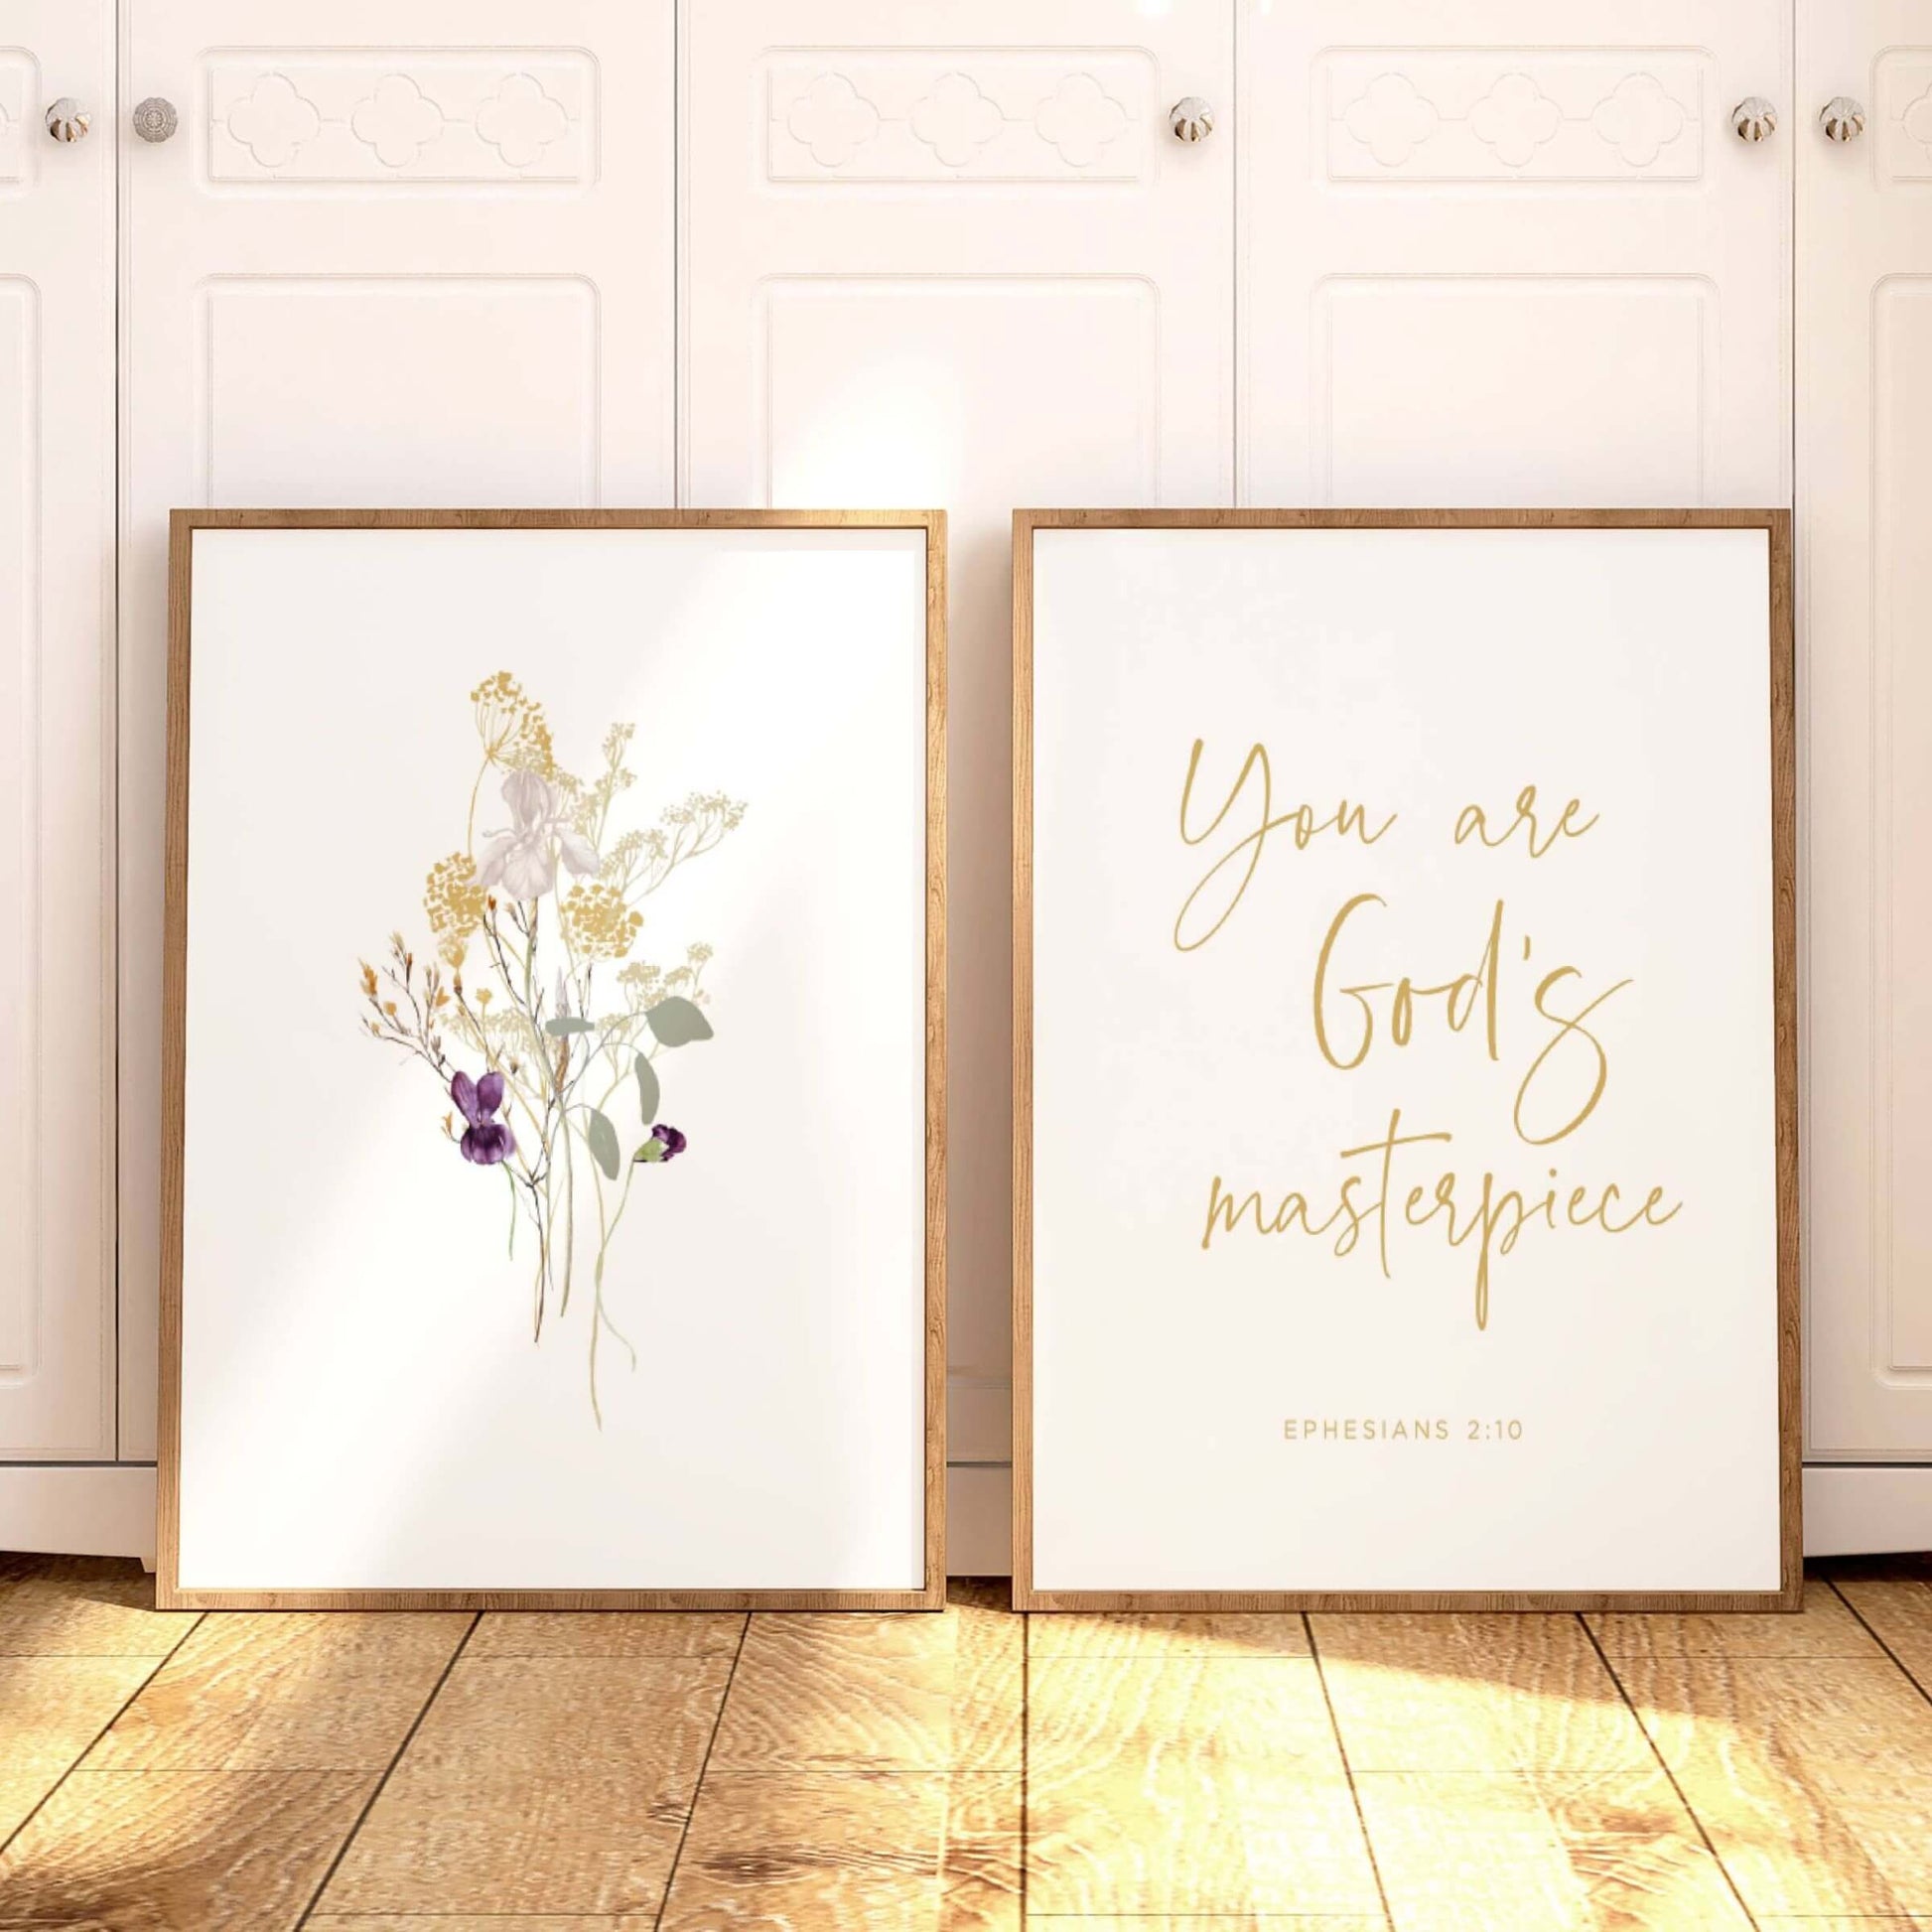 christian wall art set of 2 with bible verse and flowers